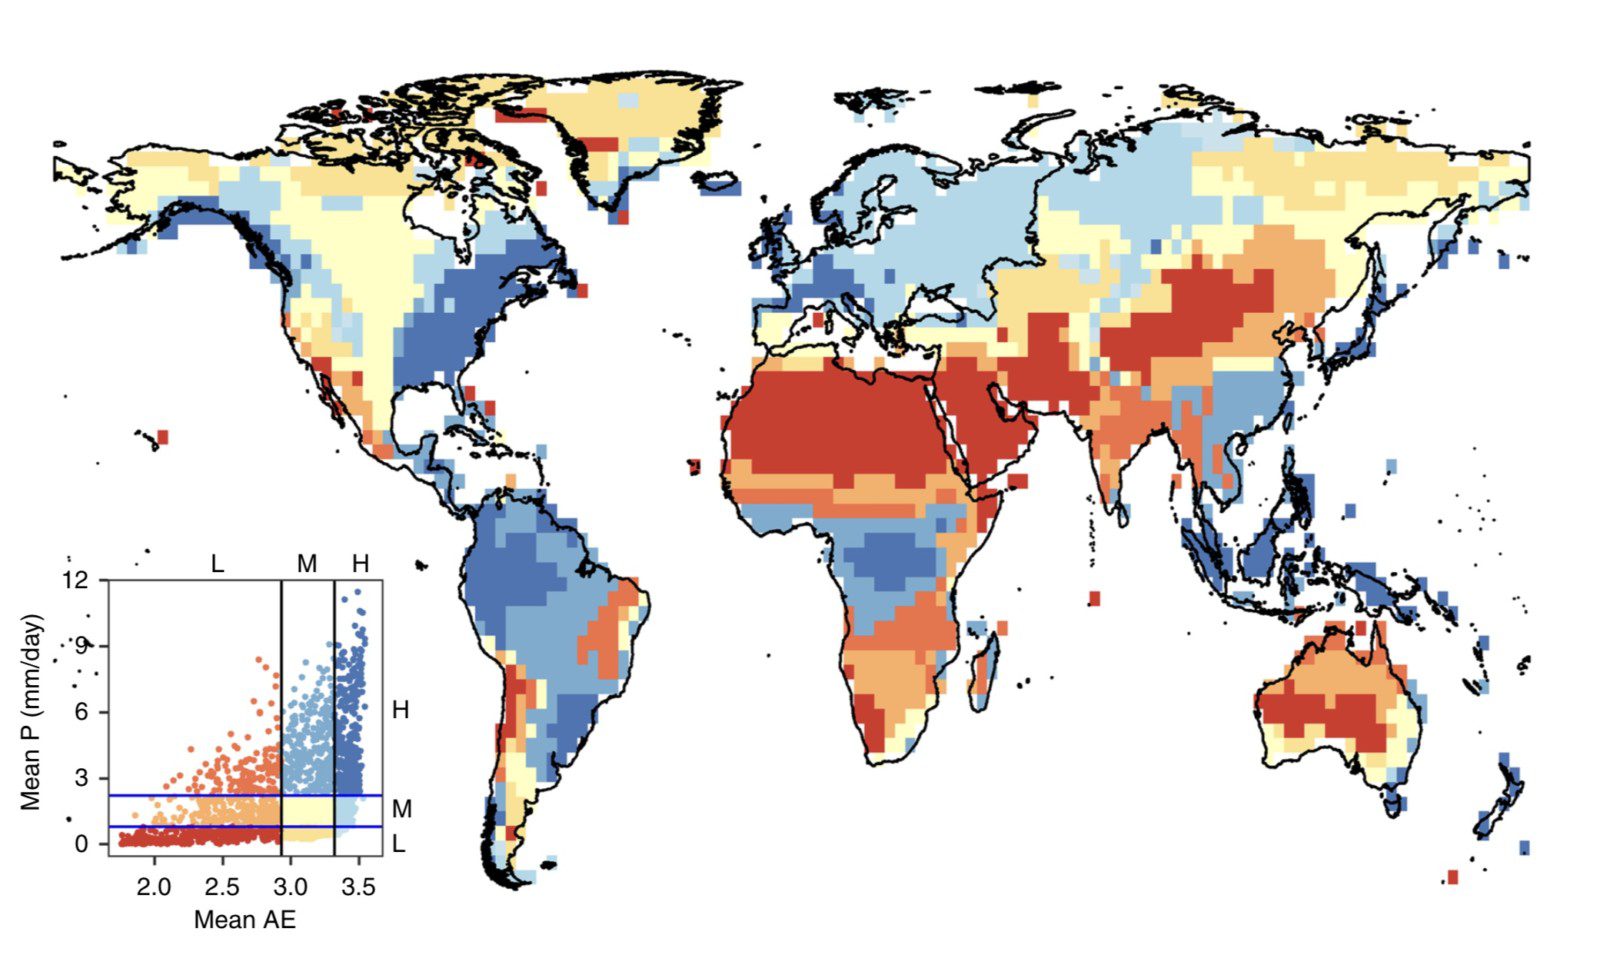 his map shows how various precipitation regions — also called regimes— are distributed throughout the world, according to new research involving Clemson University’s Ashok Mishra. Areas in dark orange are most vulnerable to extremes in wet and dry seasons, a trend expected to become more intense as the climate changes, researchers found. You can learn more here: https://www.nature.com/articles/s41467-020-16757-w